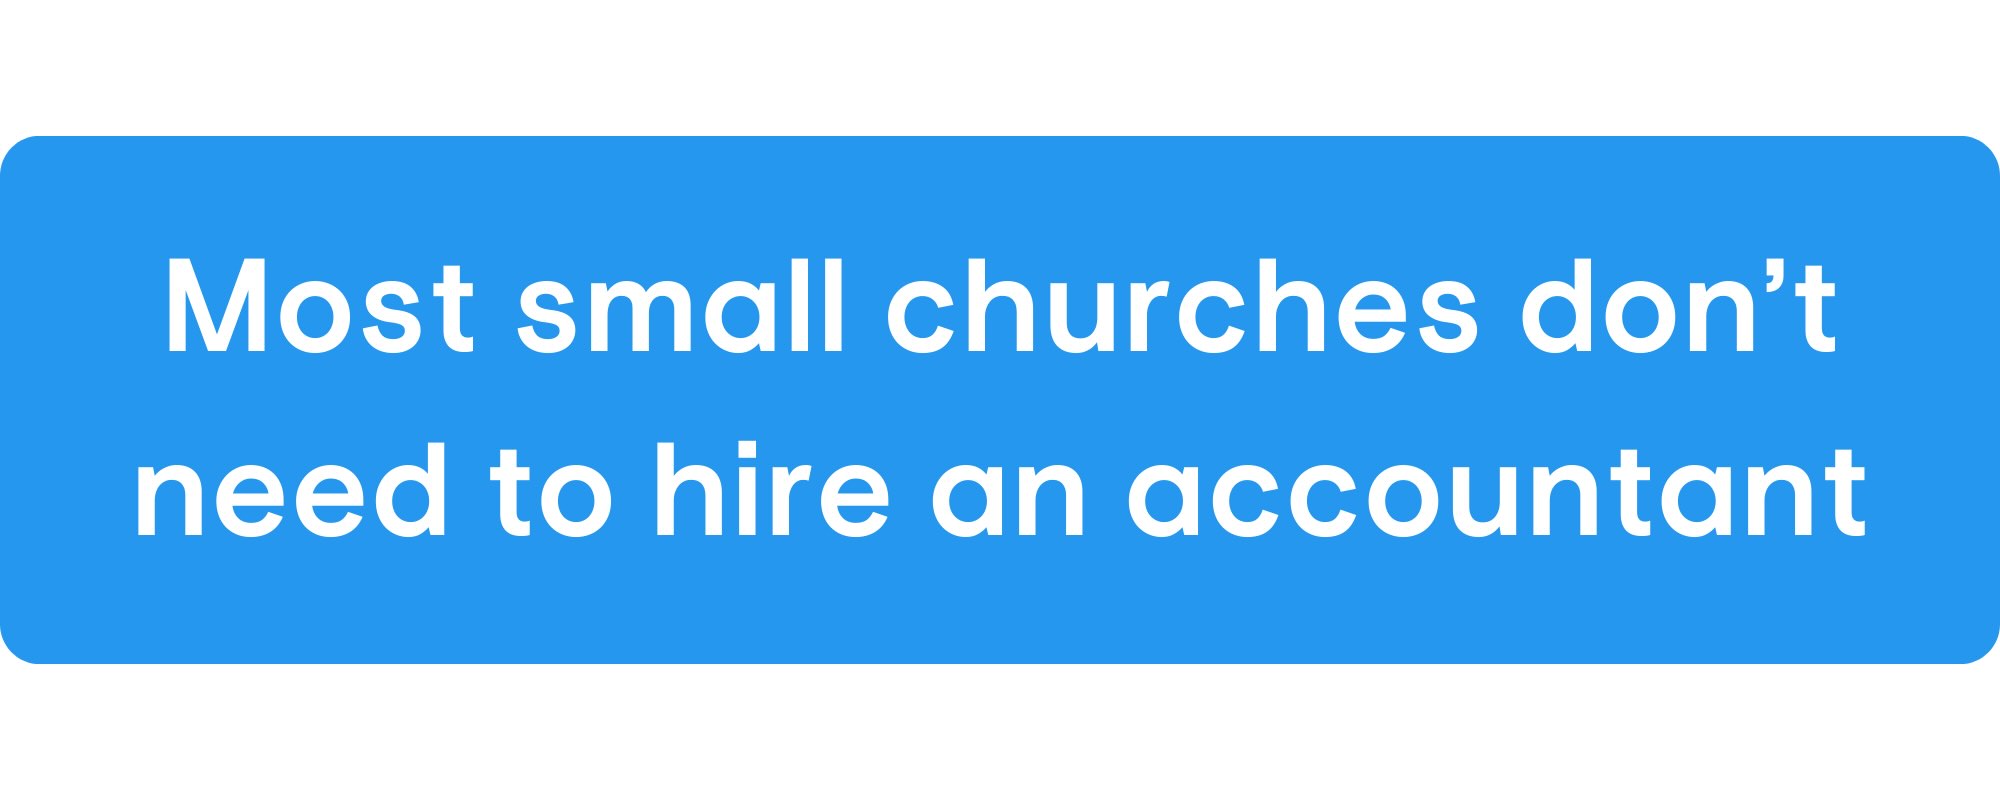 Accountant for Churches: What To Look For